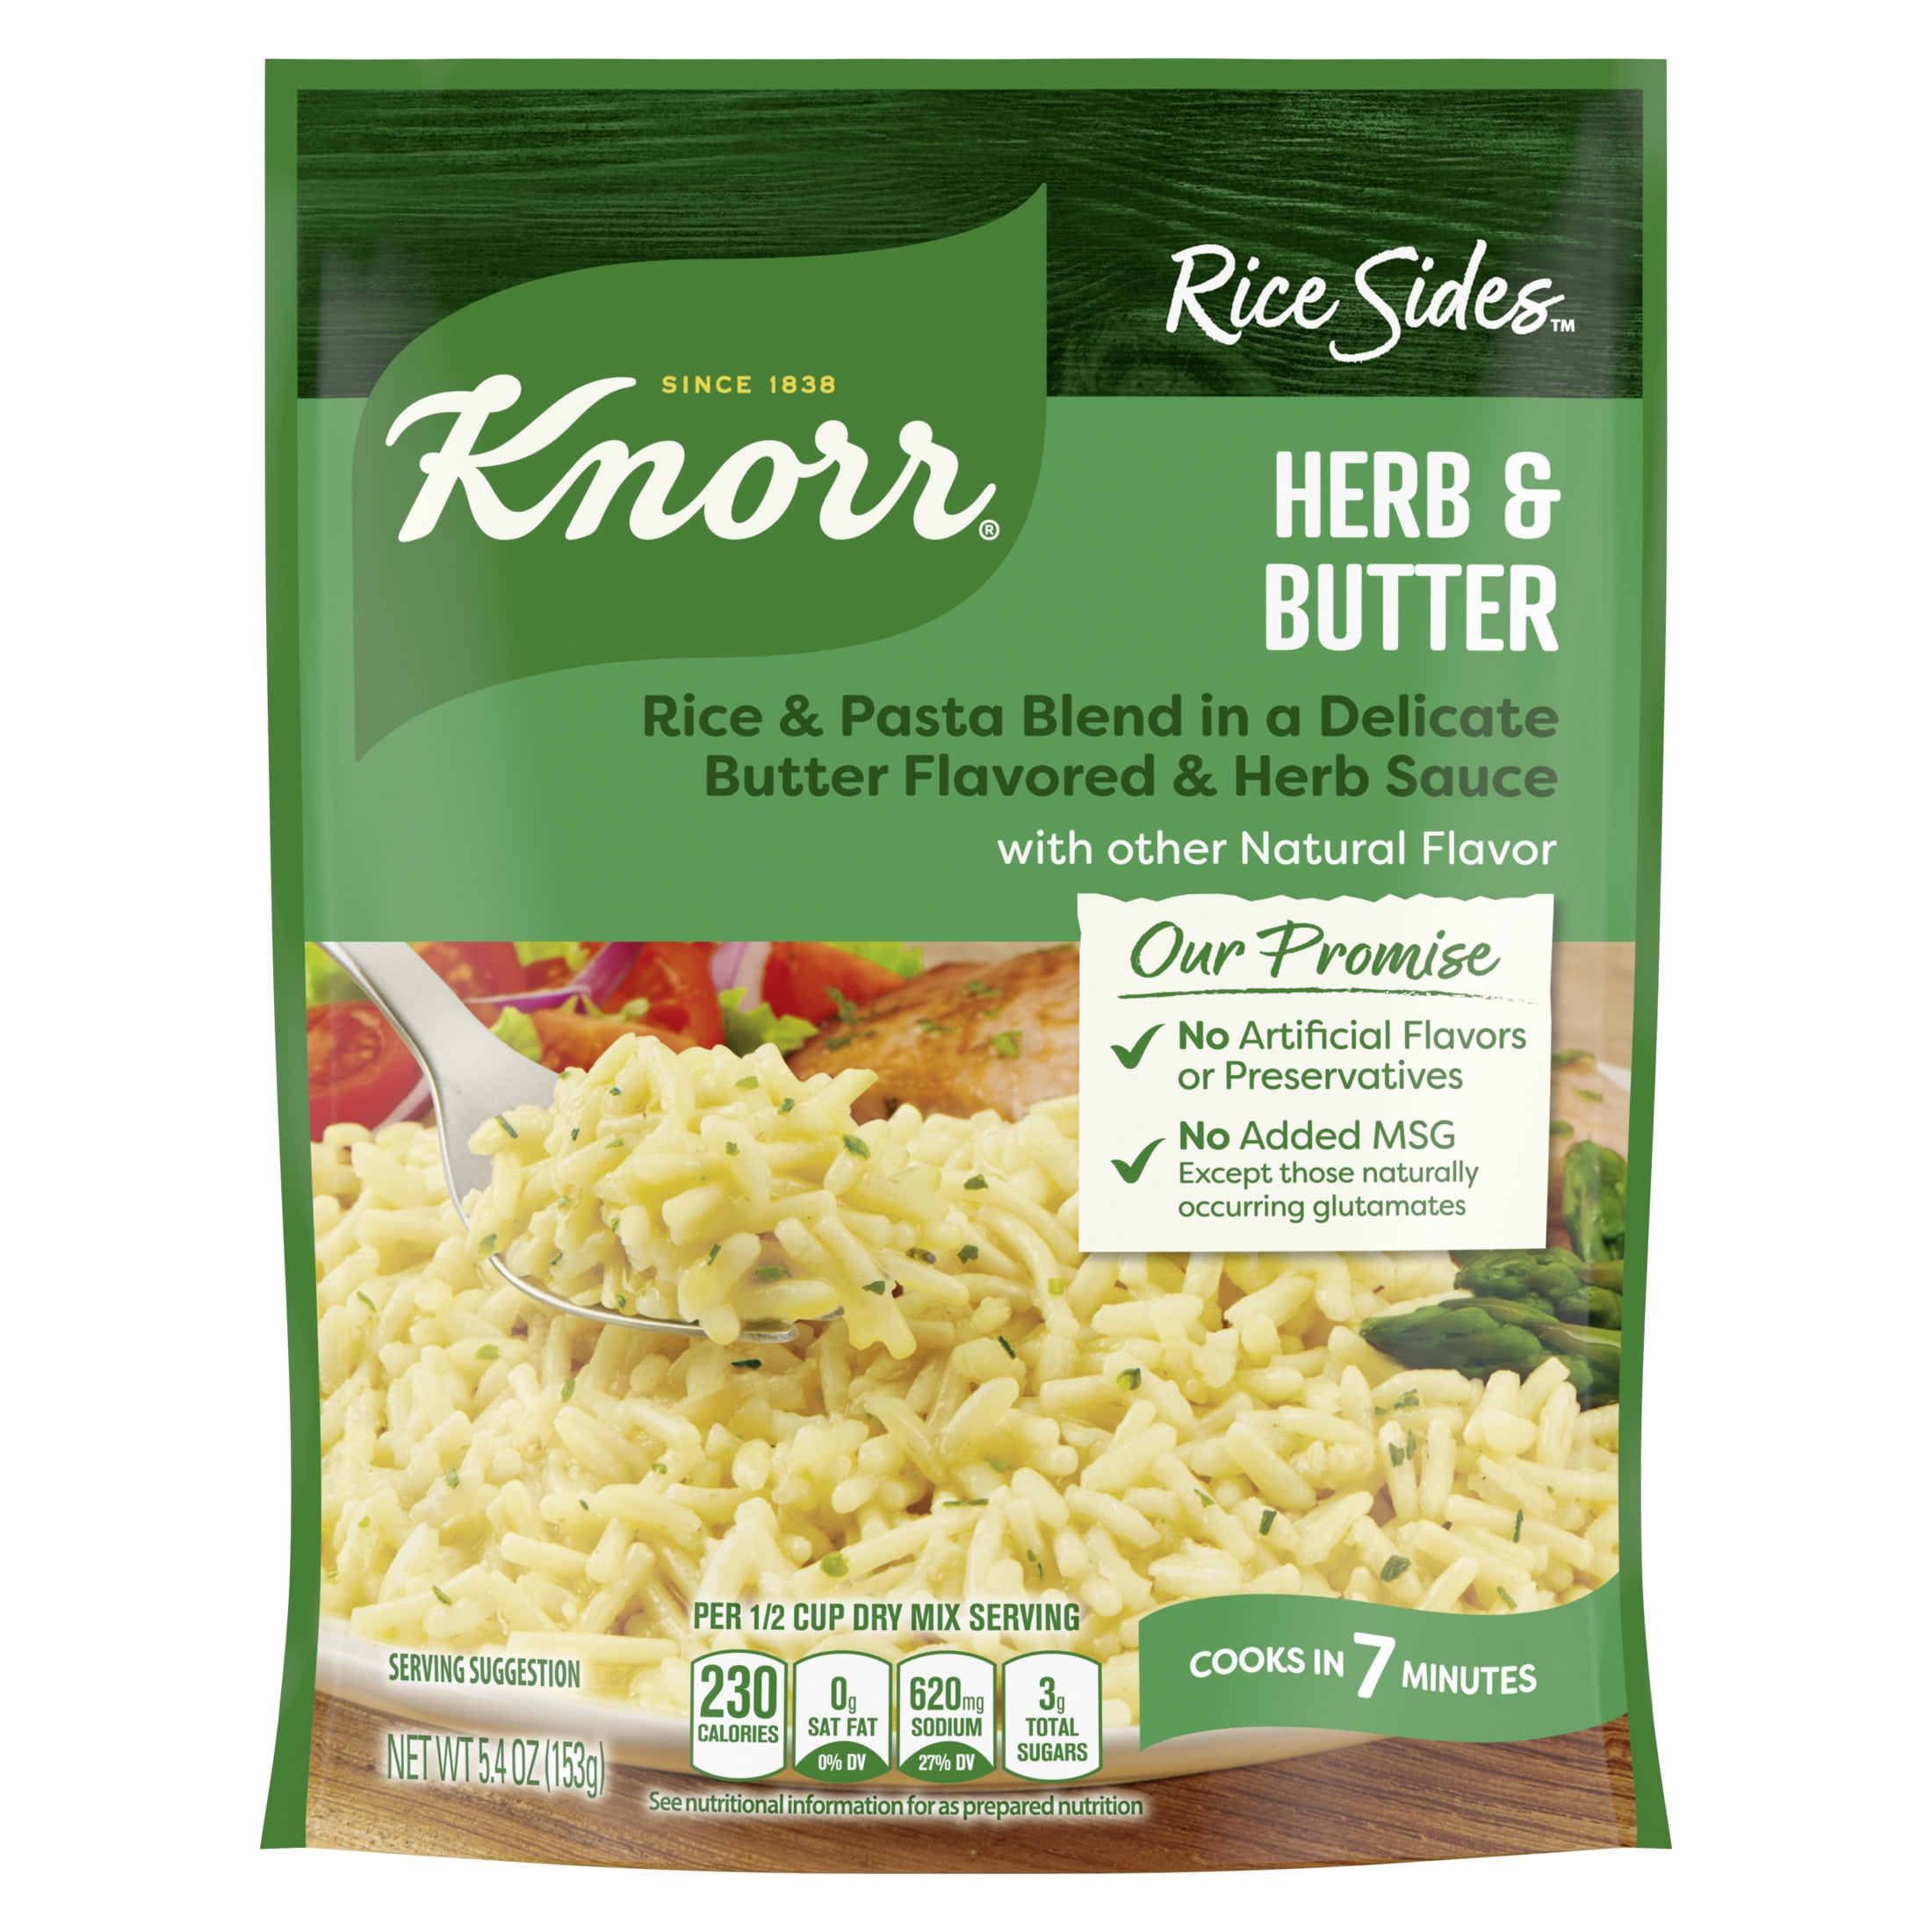 Knorr Rice Sides Herb & Butter Rice and Pasta Blend, Cooks in 7 Minutes, No Artificial Flavors, No Preservatives, No Added MSG 5.4 oz